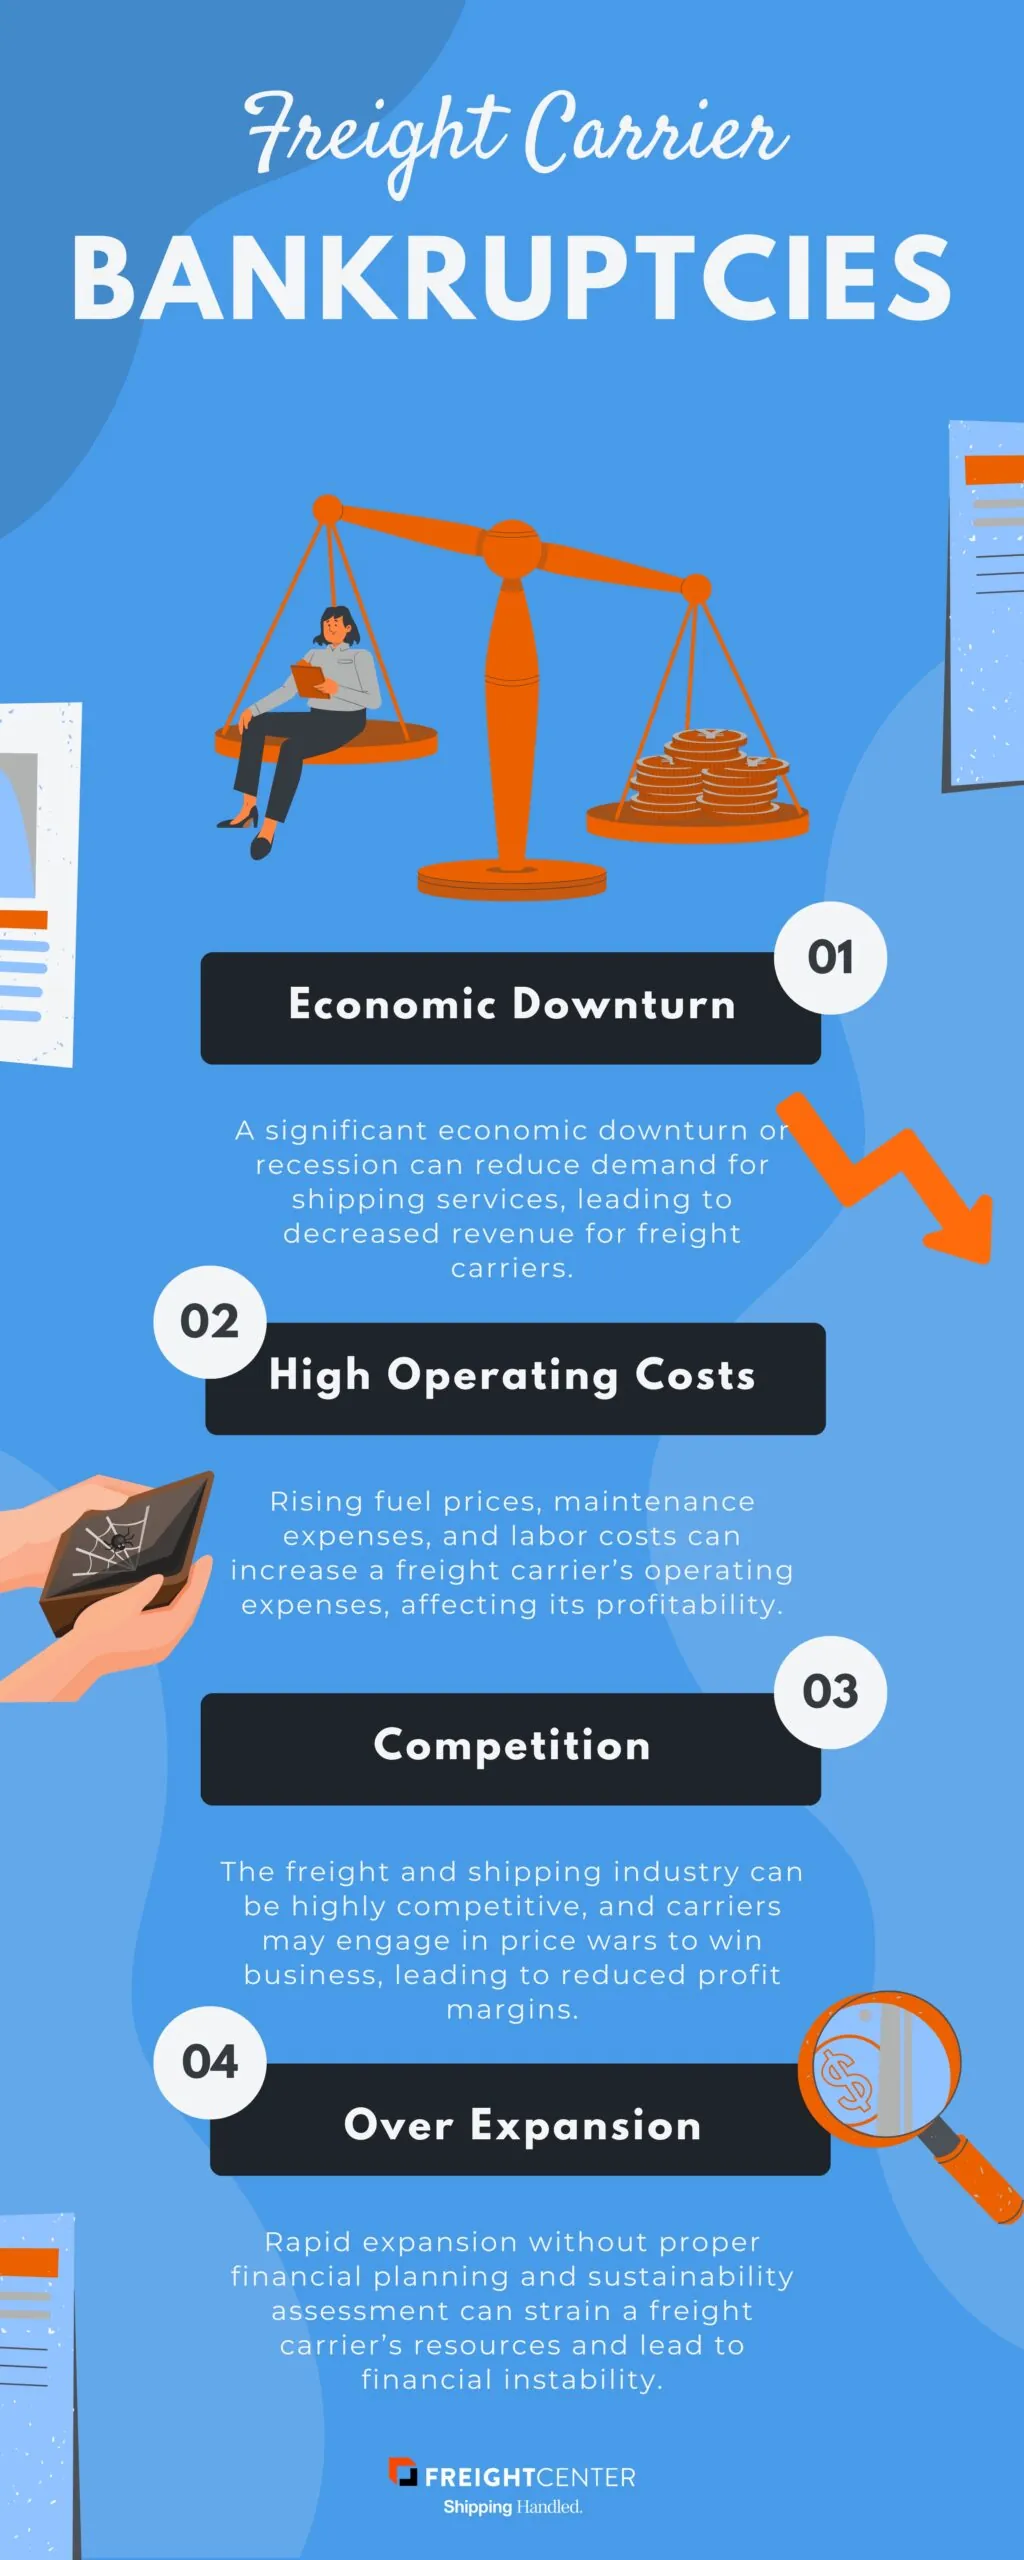 freight carrier bankruptcies infographic with 4 key points, economic downturn, high operating costs, competition, over expansion